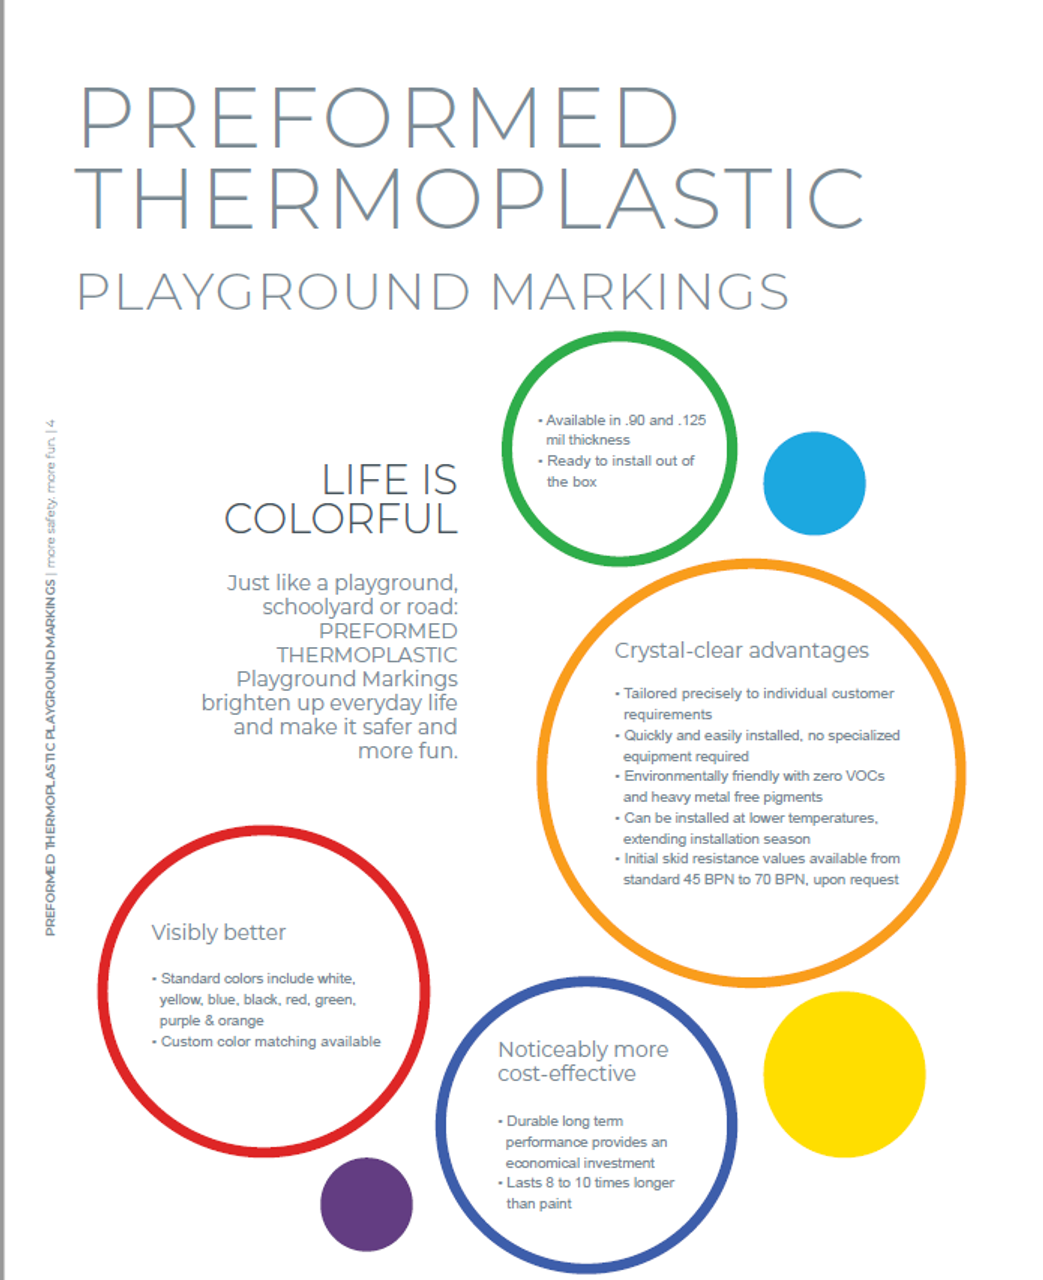 Swarco Playground Marking Brochure Life is Colorful